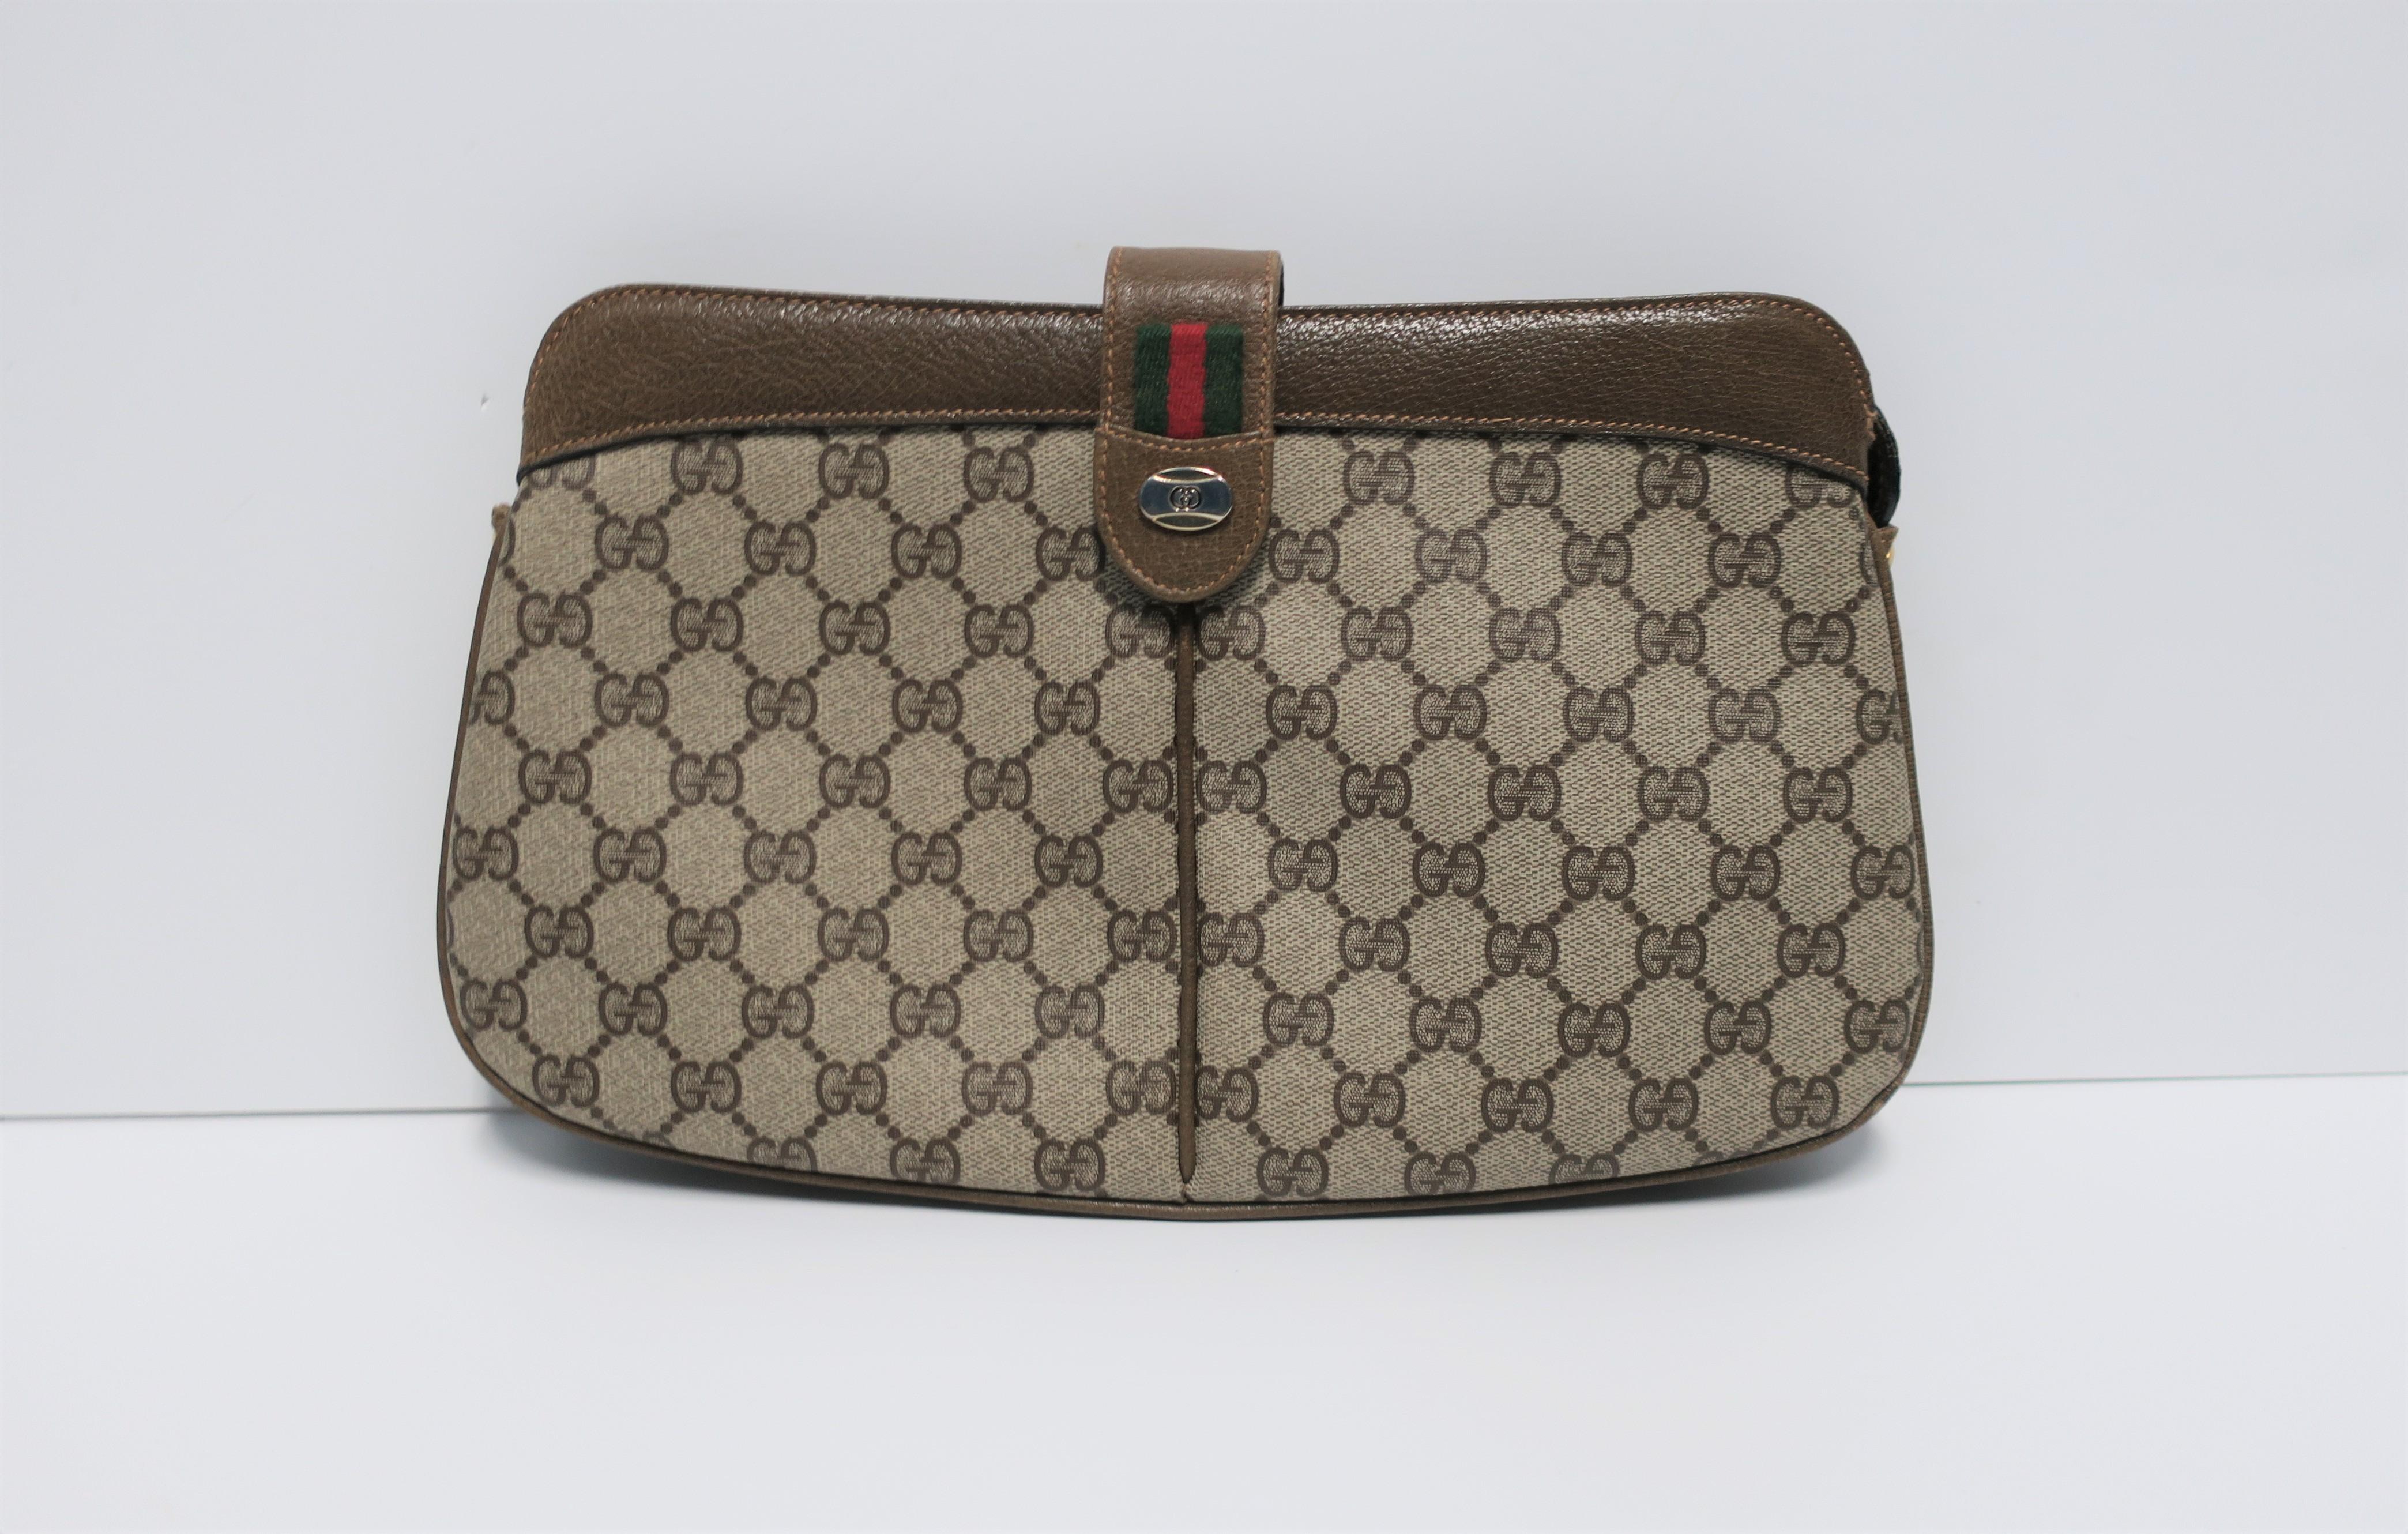 A chic classic authentic Gucci clutch handbag featuring its iconic 'G' tan canvas, tan/brown leather trim and piping, red/green racing stripe, and two-tone metal Gucci logo. Marked 'Gucci' and 'Made in Italy' on interior leather tag (see image #6.)